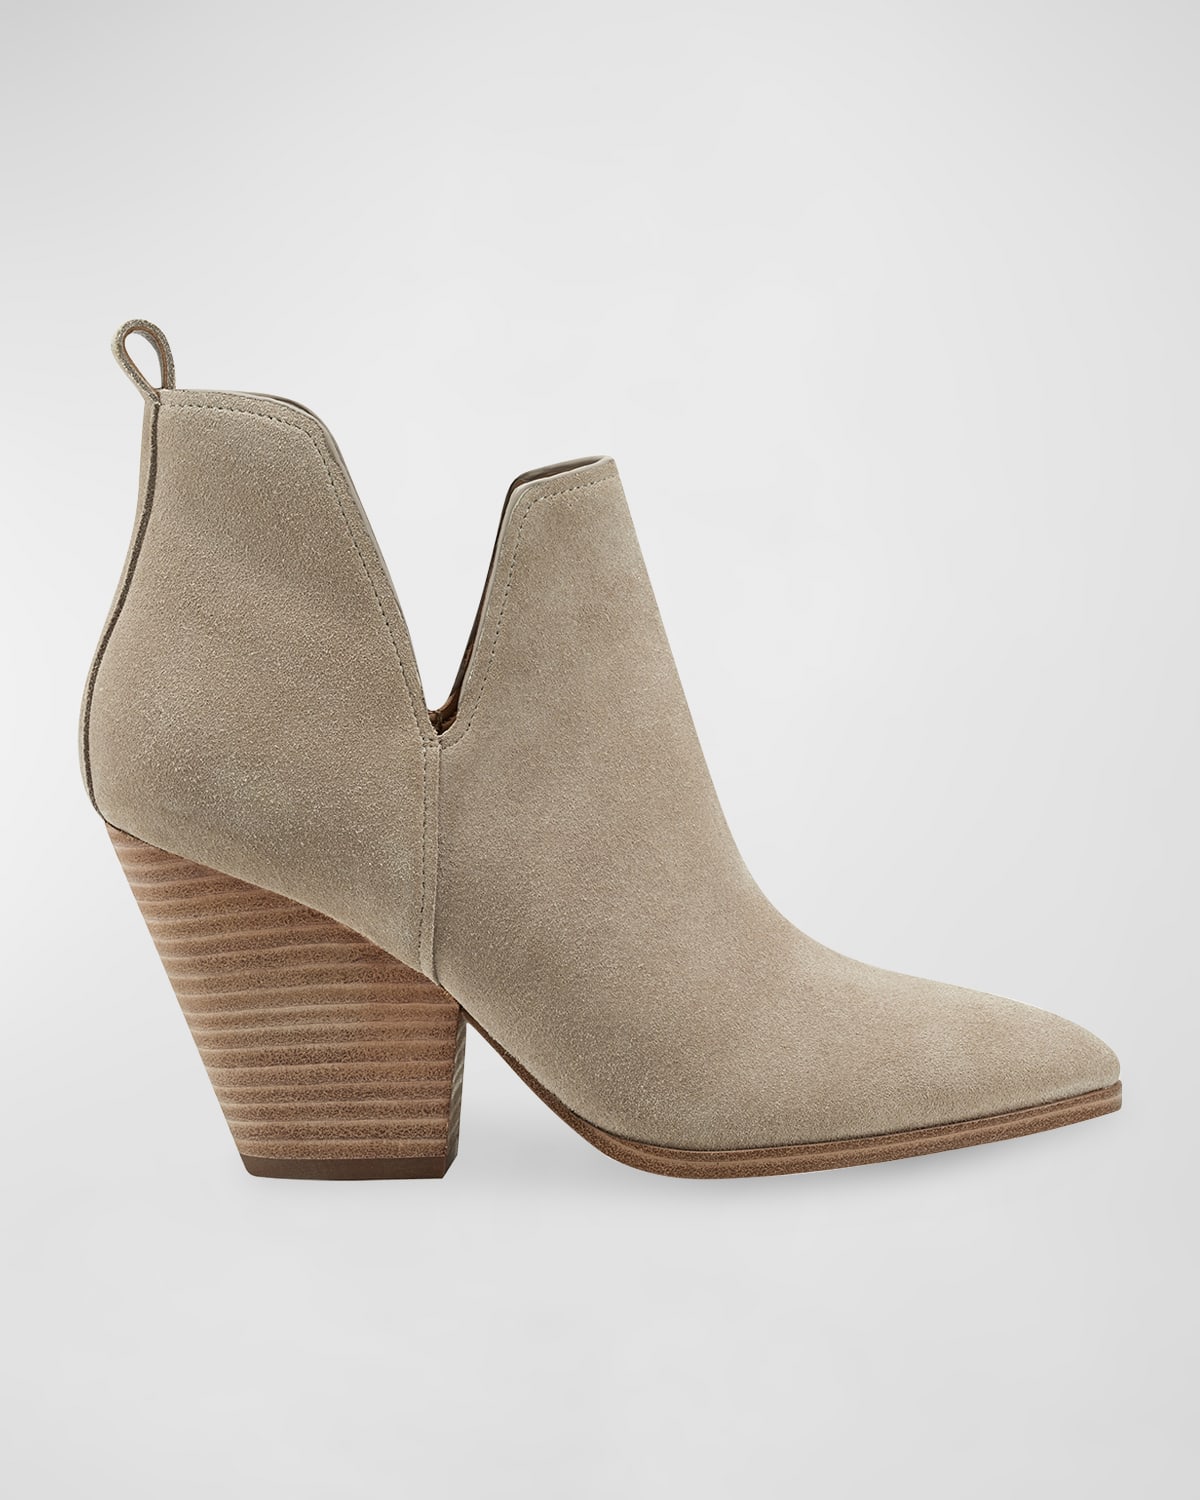 MARC FISHER LTD TANILLA SUEDE ANKLE BOOTS